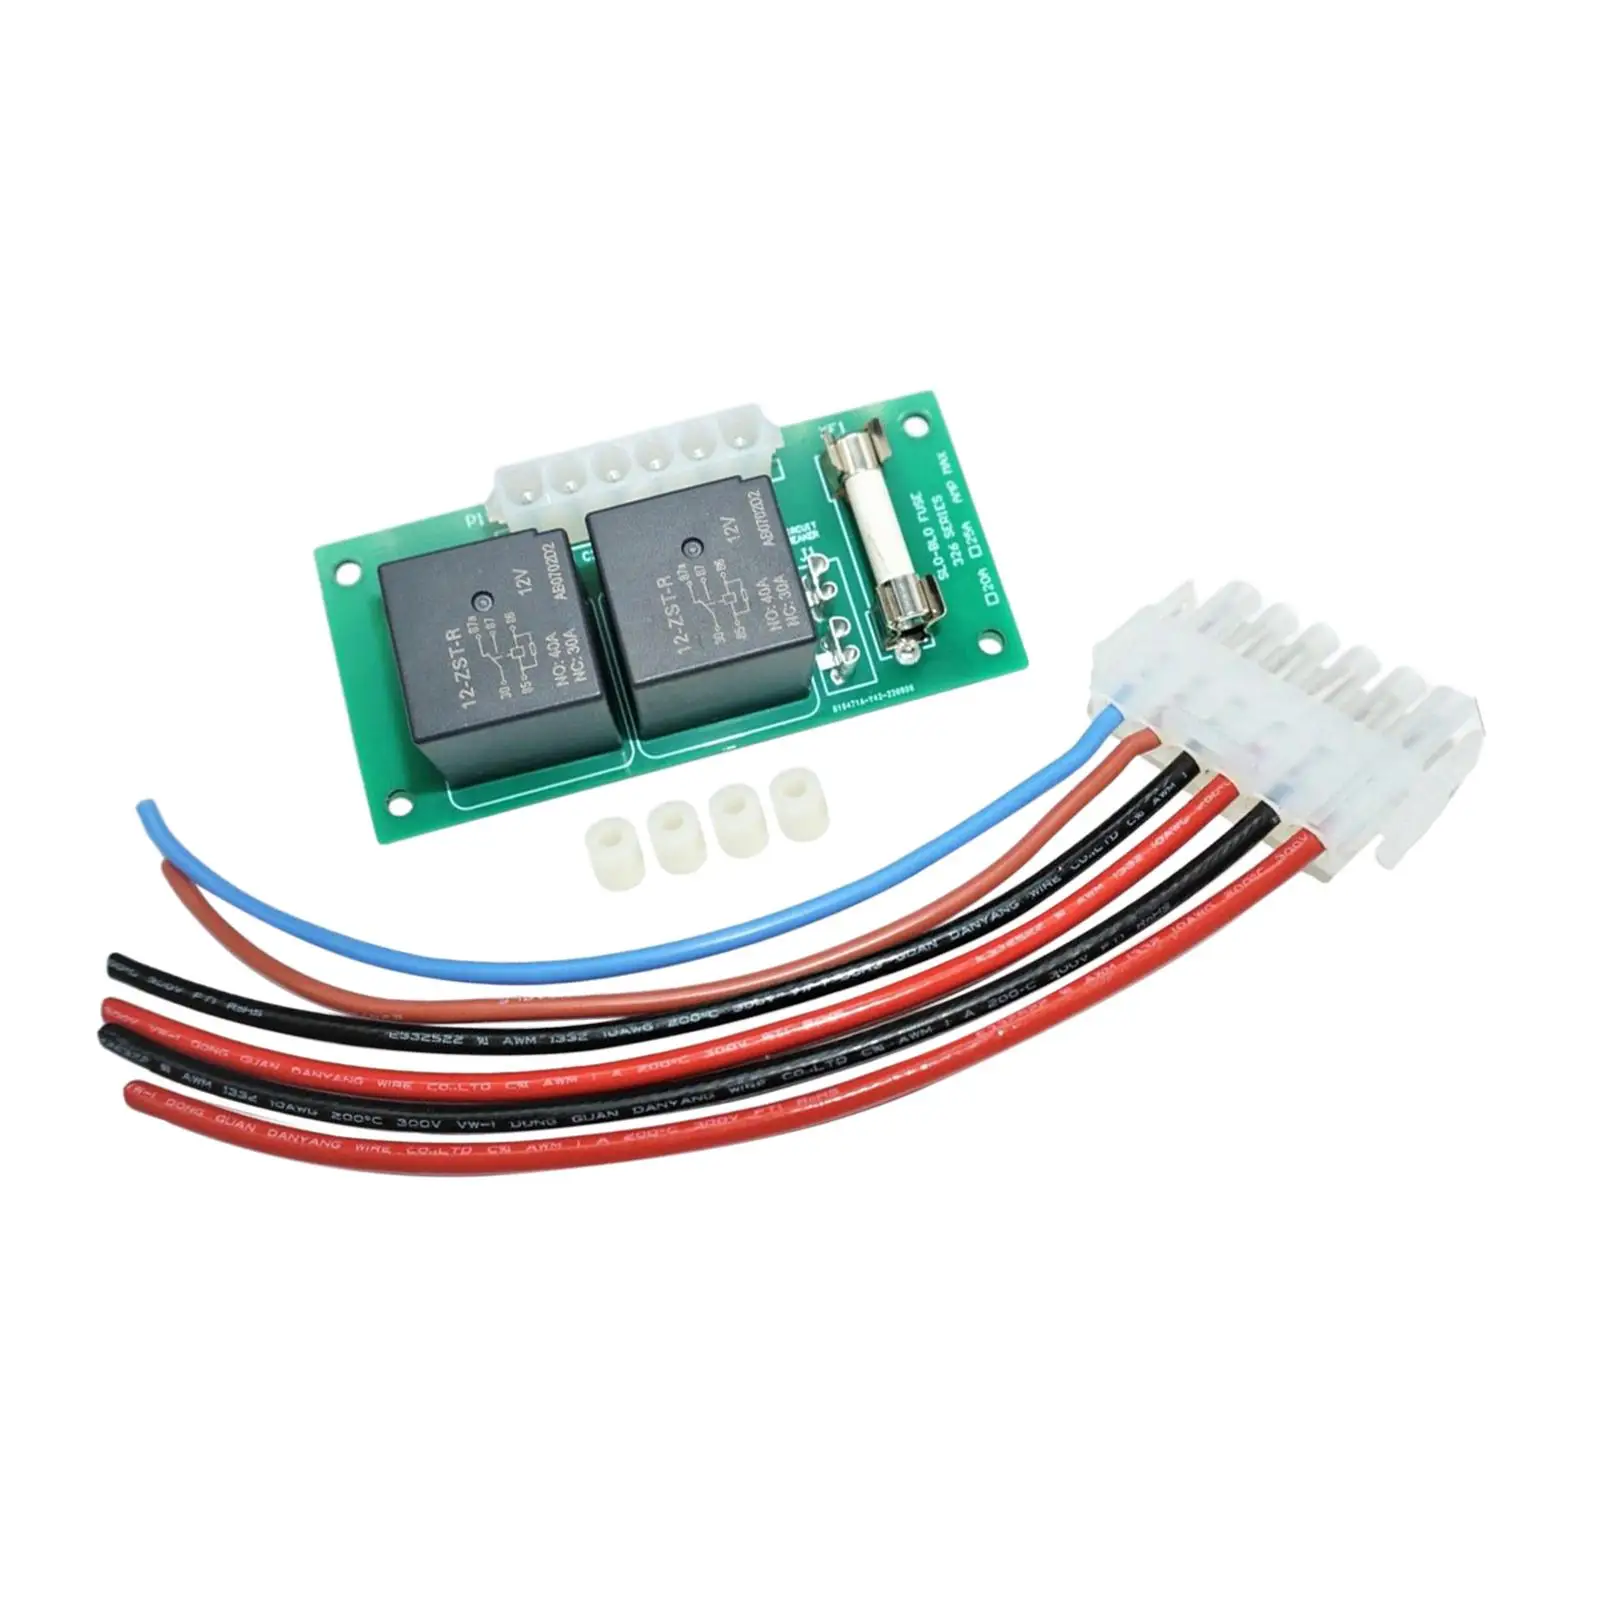 140-1130 Slide Out Relay Control Boards Easy to Install Vehicle with Spacers